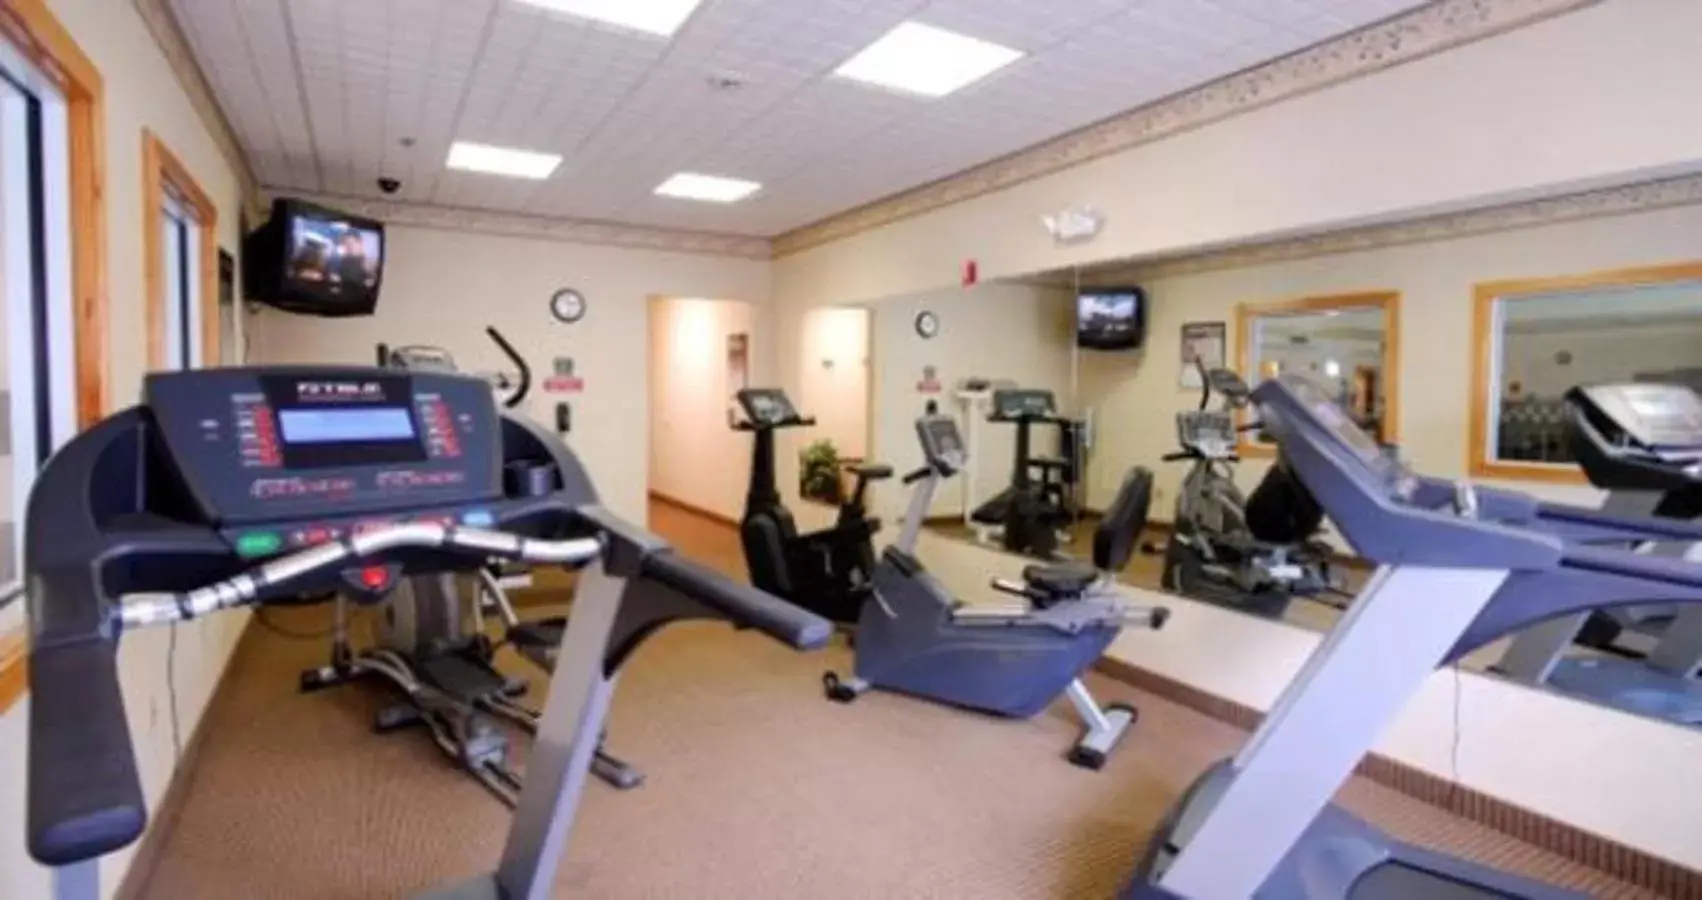 Fitness centre/facilities, Fitness Center/Facilities in Country Inn & Suites by Radisson, Cincinnati Airport, KY